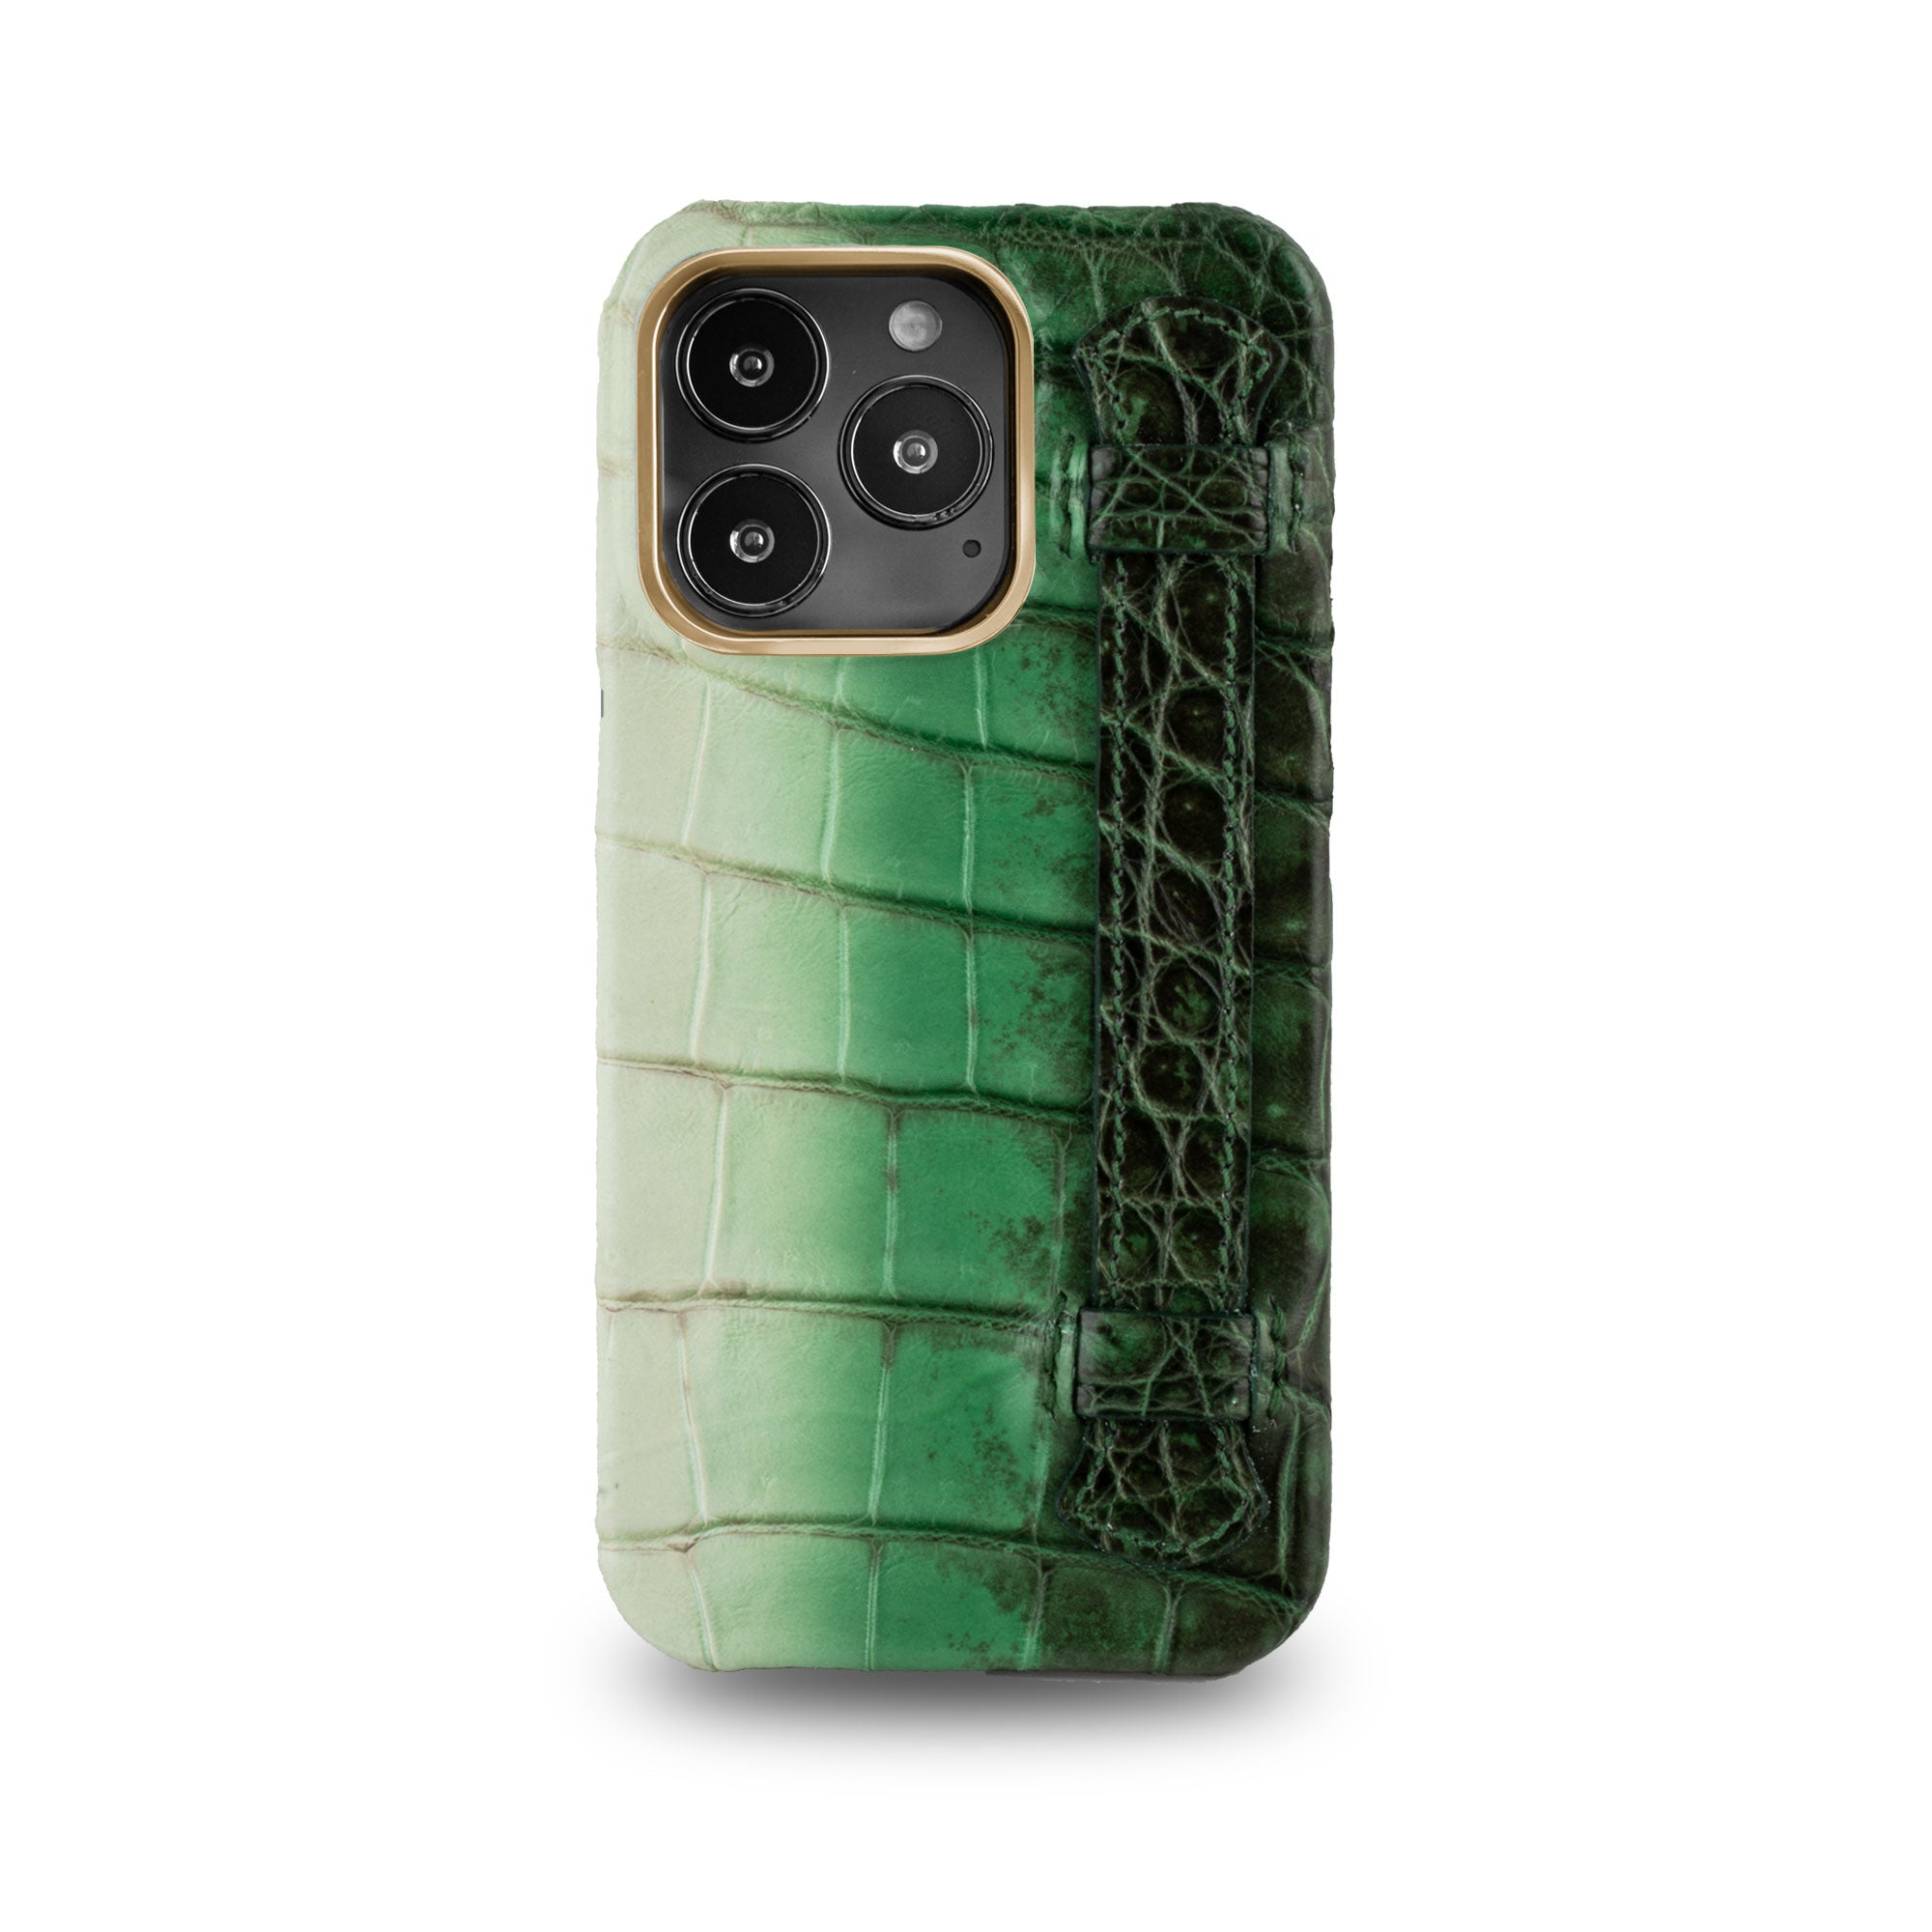 Leather iPhone HIMALAYA "Strap case" / cover - iPhone 13 ( Pro / Max ) - Genuine alligator